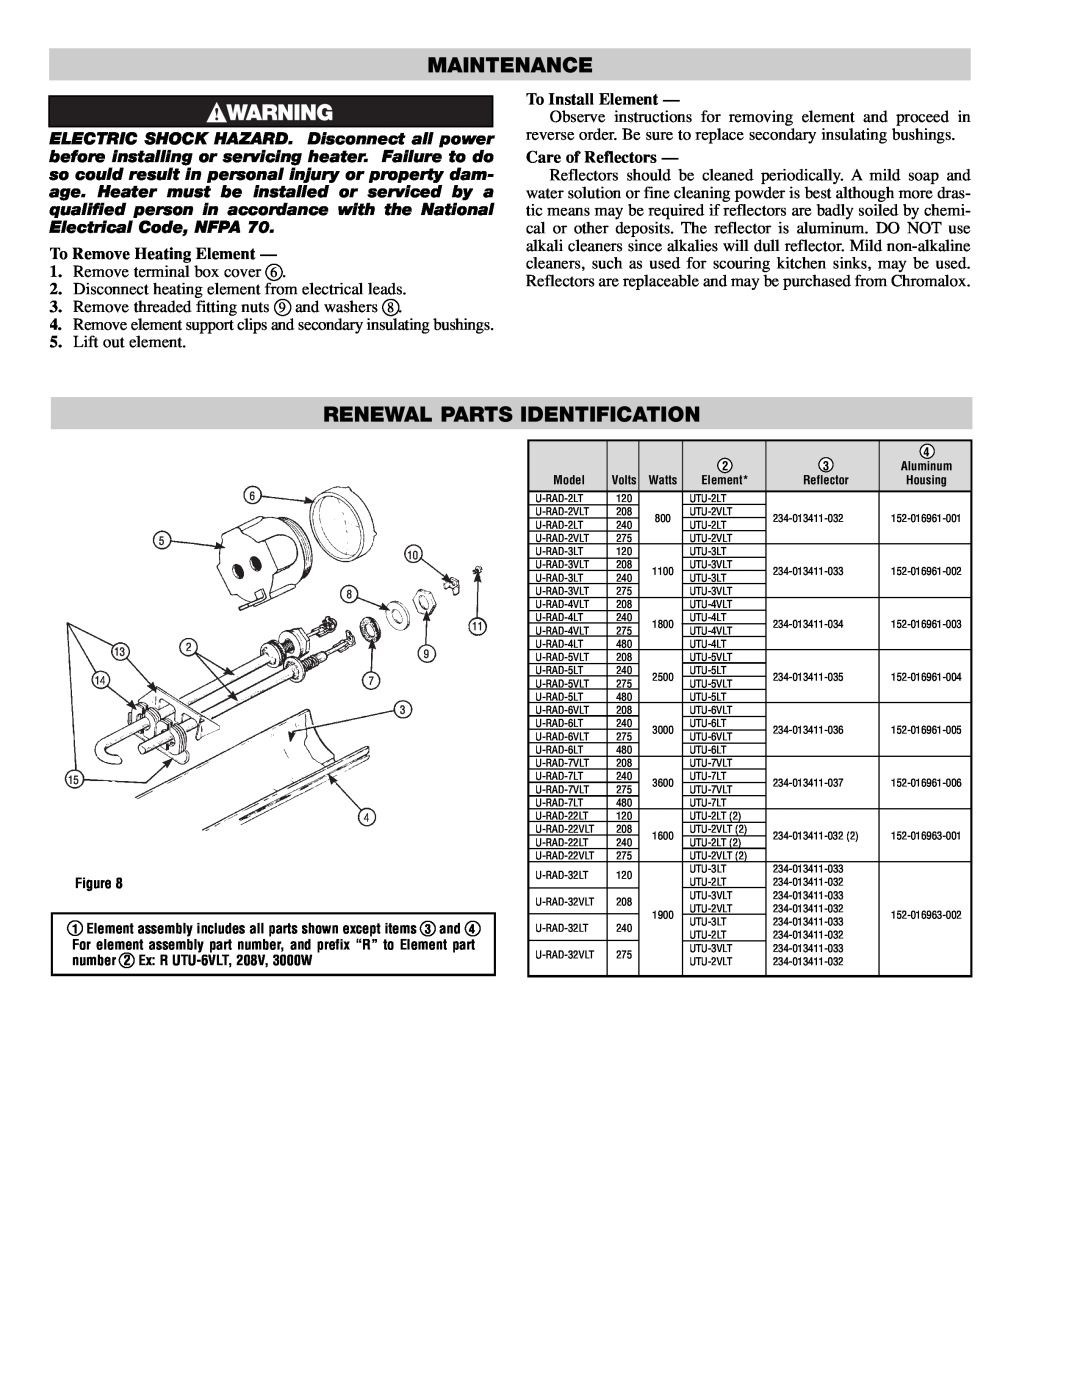 Chromalox PG421-1 specifications Maintenance, Renewal Parts Identification, To Remove Heating Element, To Install Element 